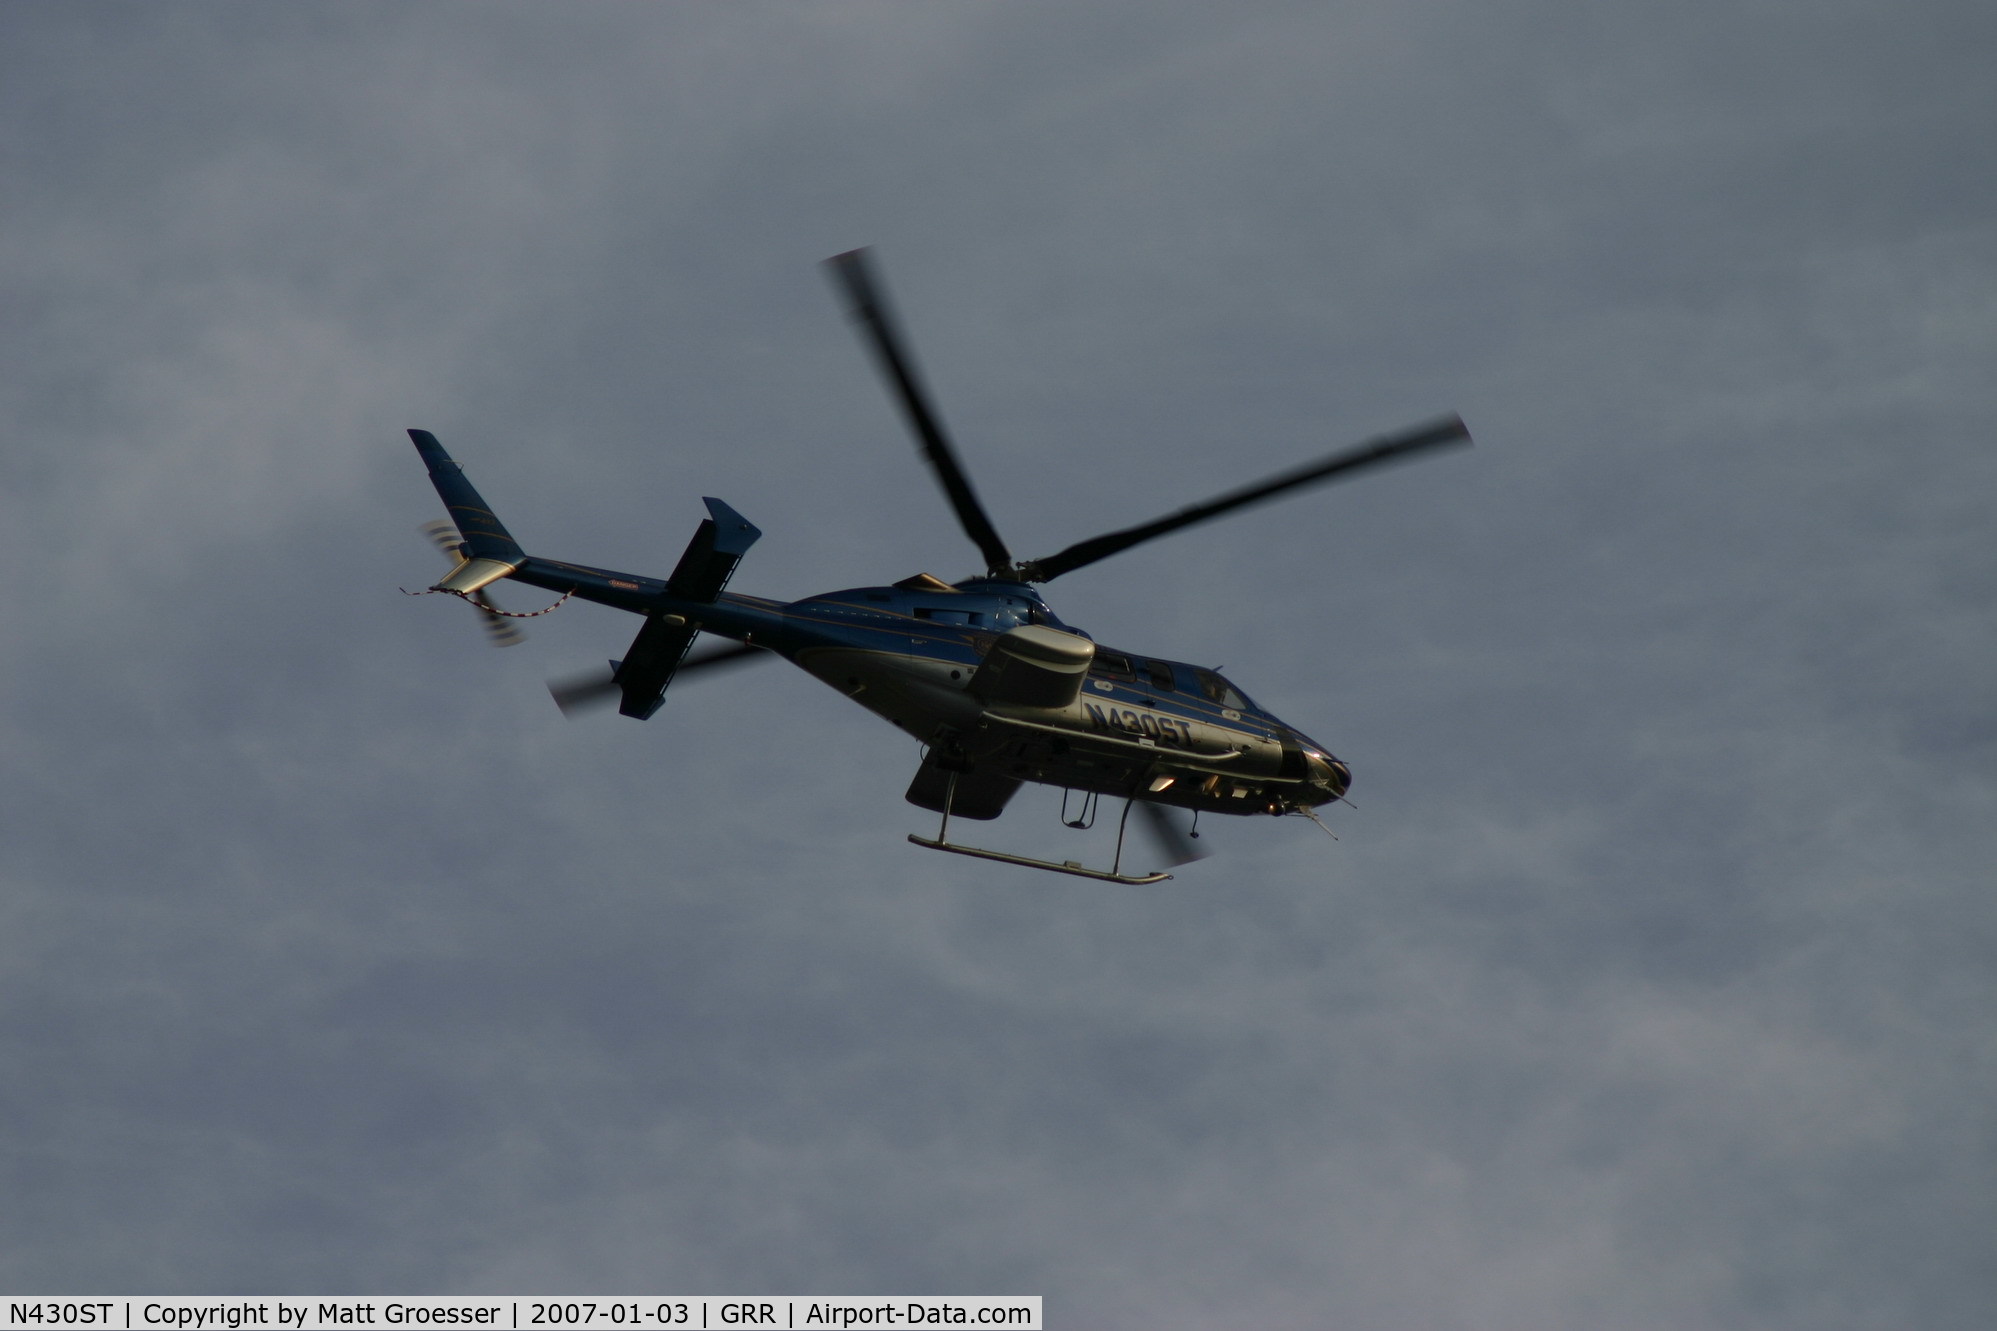 N430ST, 2000 Bell 430 C/N 49071, MSP helicopter in Grand Rapids for Gerald R. Ford Funeral Security Detail